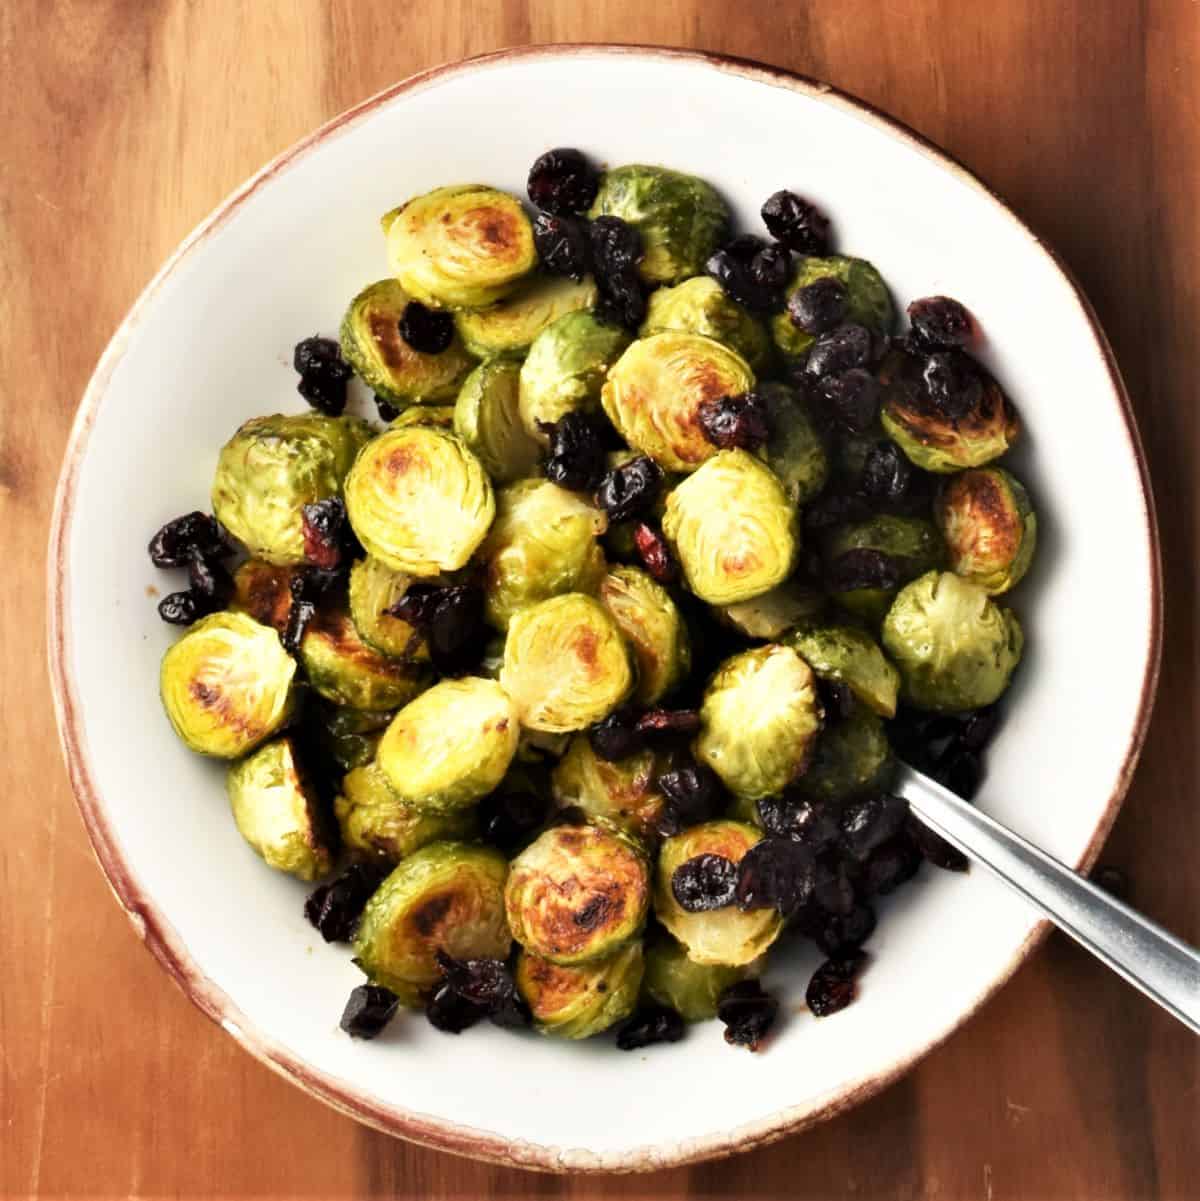 Top down view of roasted brussels sprouts with cranberries in white bowl with spoon.